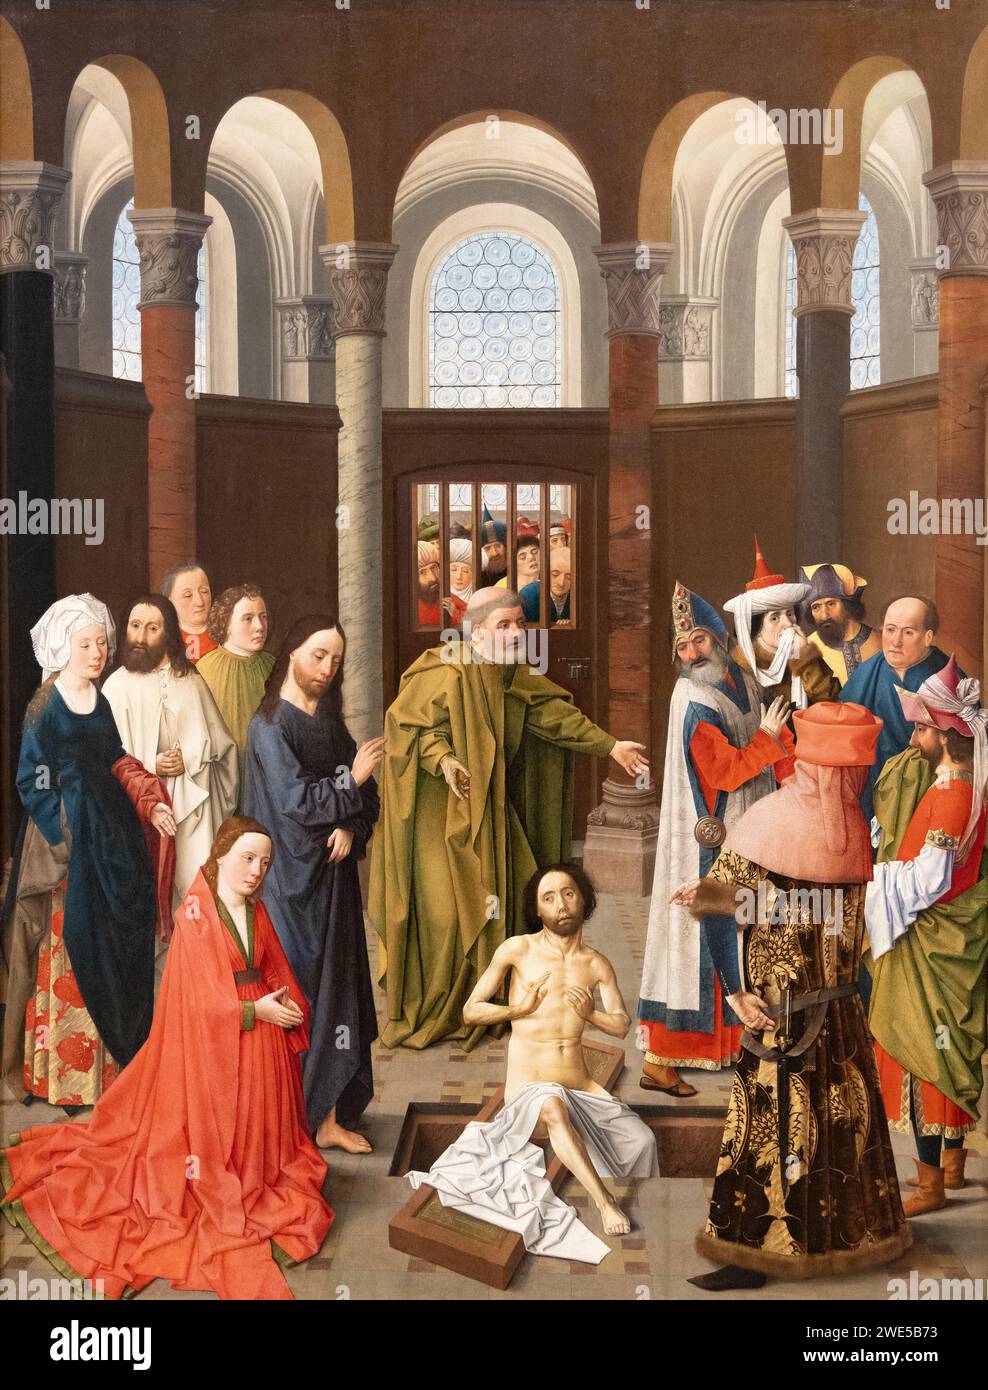 Albert van Ouwater painting, 'The Raising of Lazarus', c. 1465, Early Netherlandish painter. This is his only fully attributed painting. c 1410-1475. Stock Photo